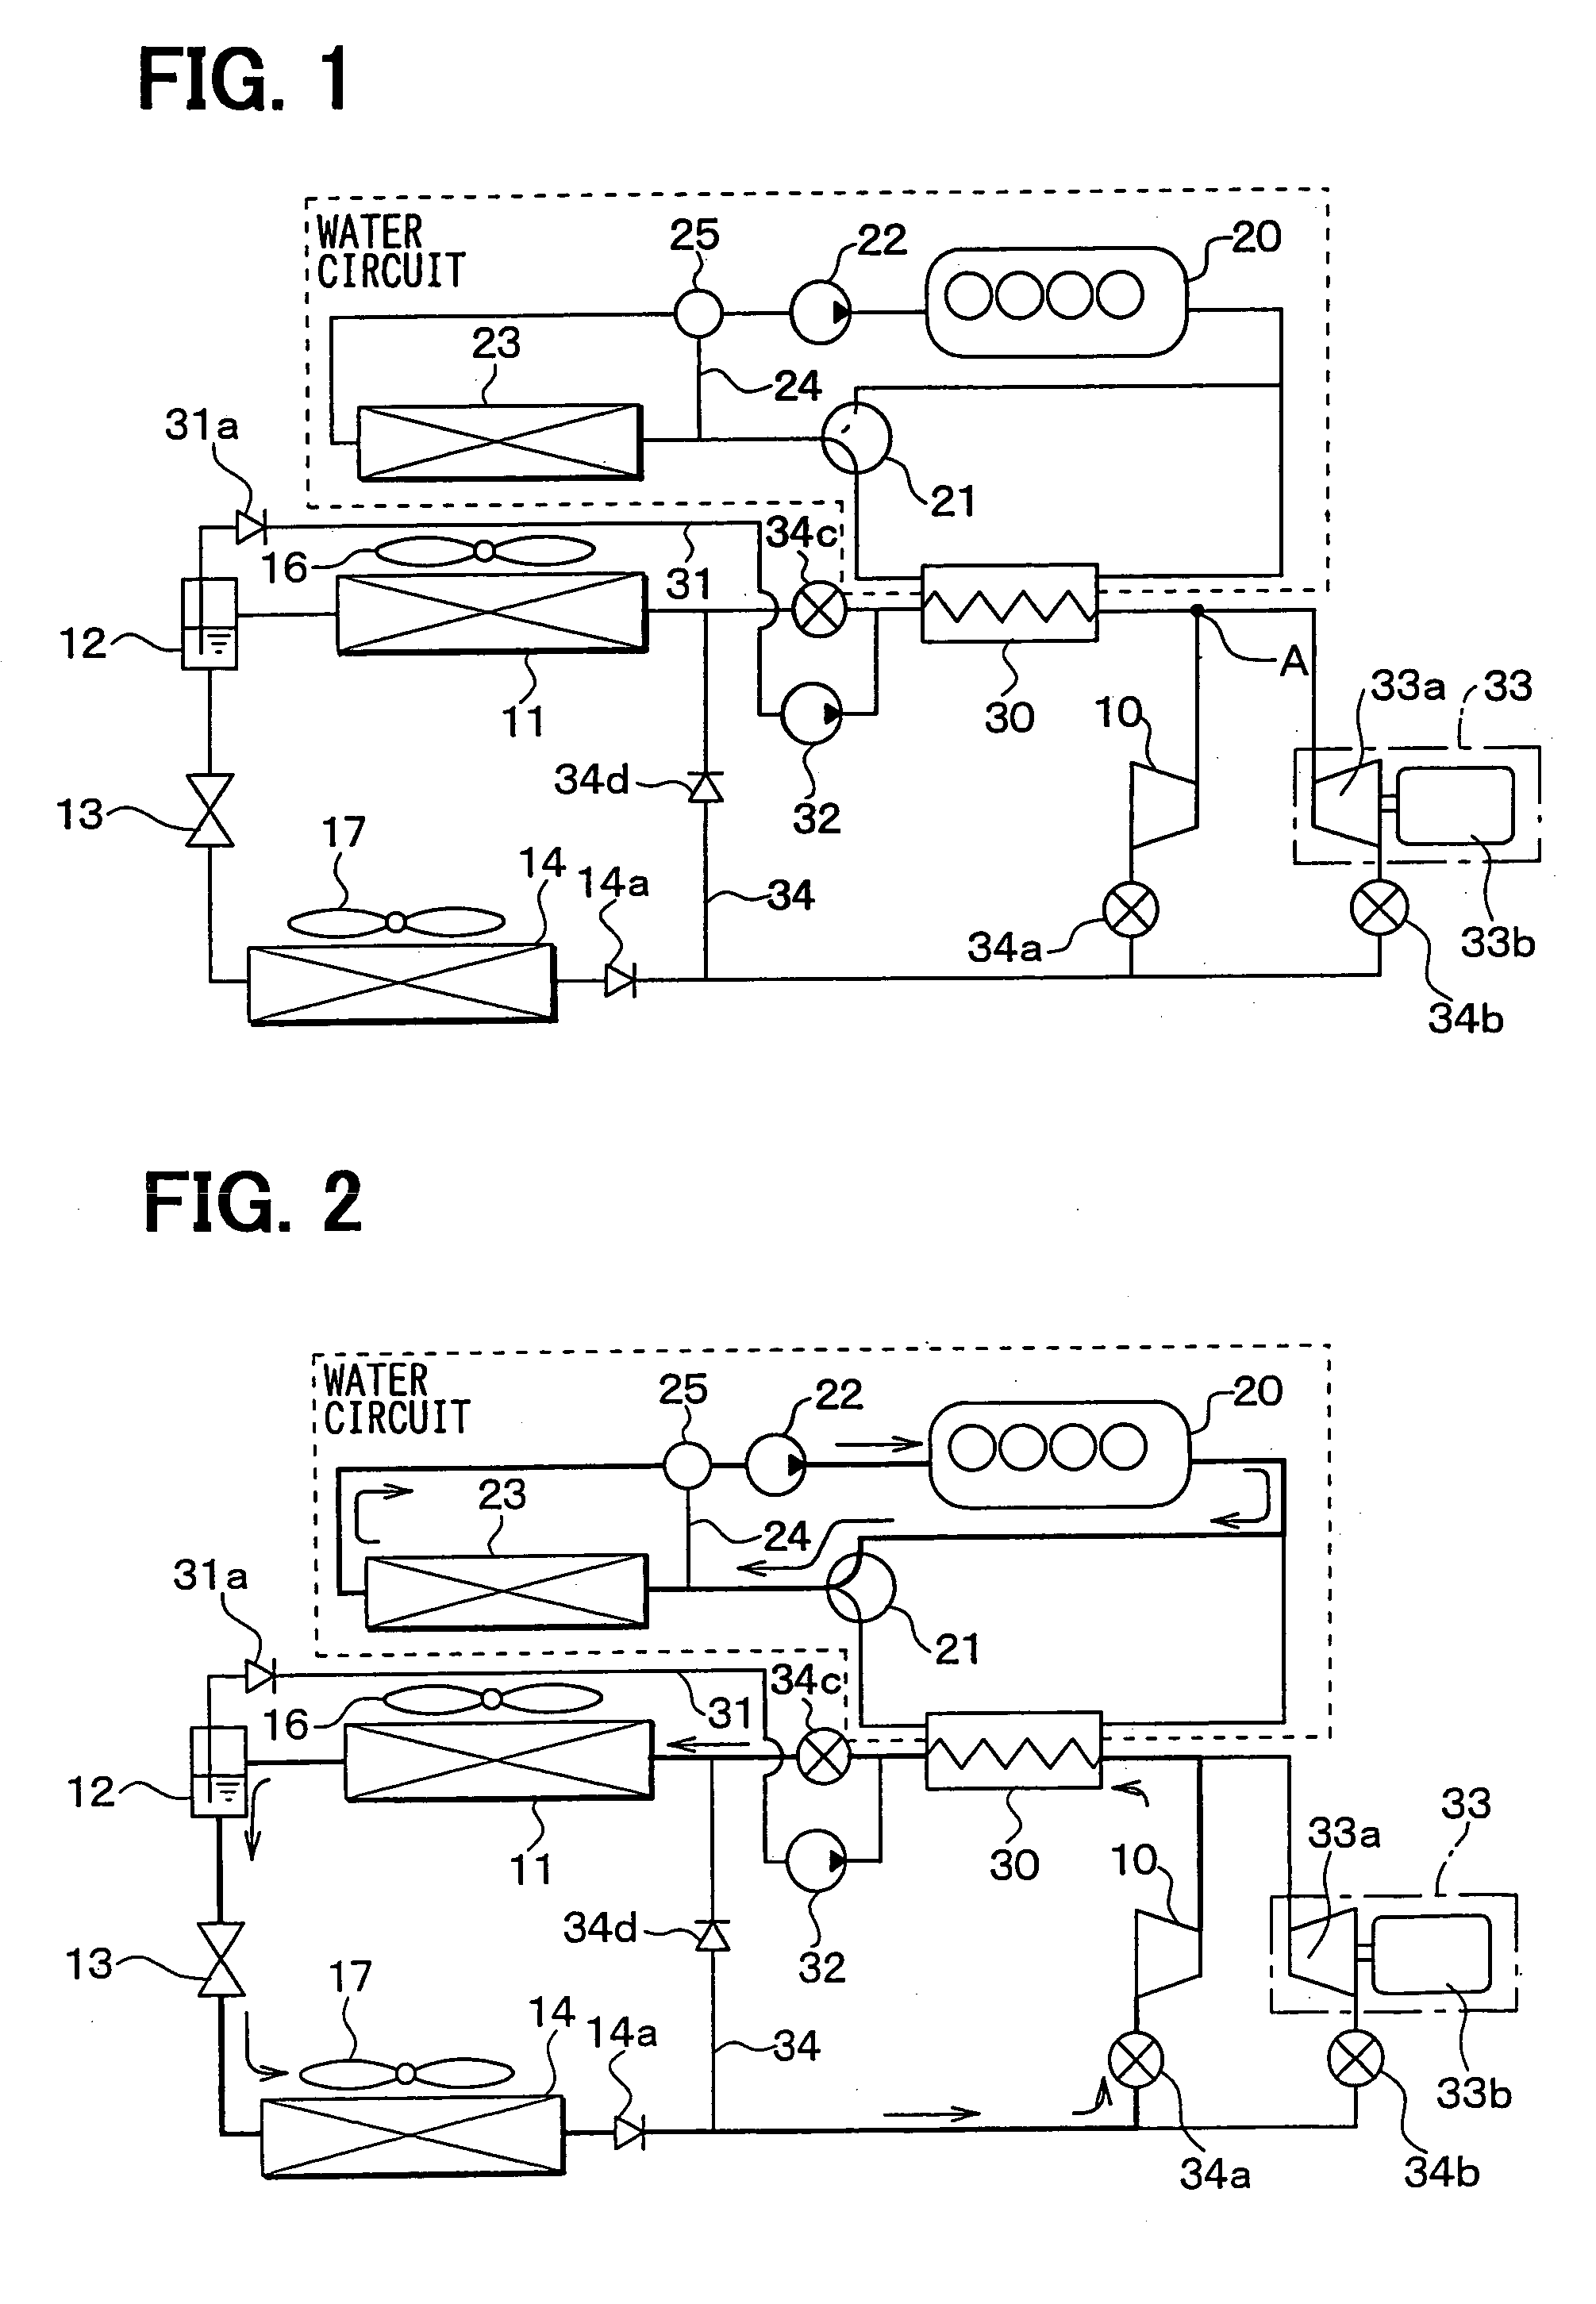 Vapor-compression refrigerant cycle system with refrigeration cycle and Rankine cycle